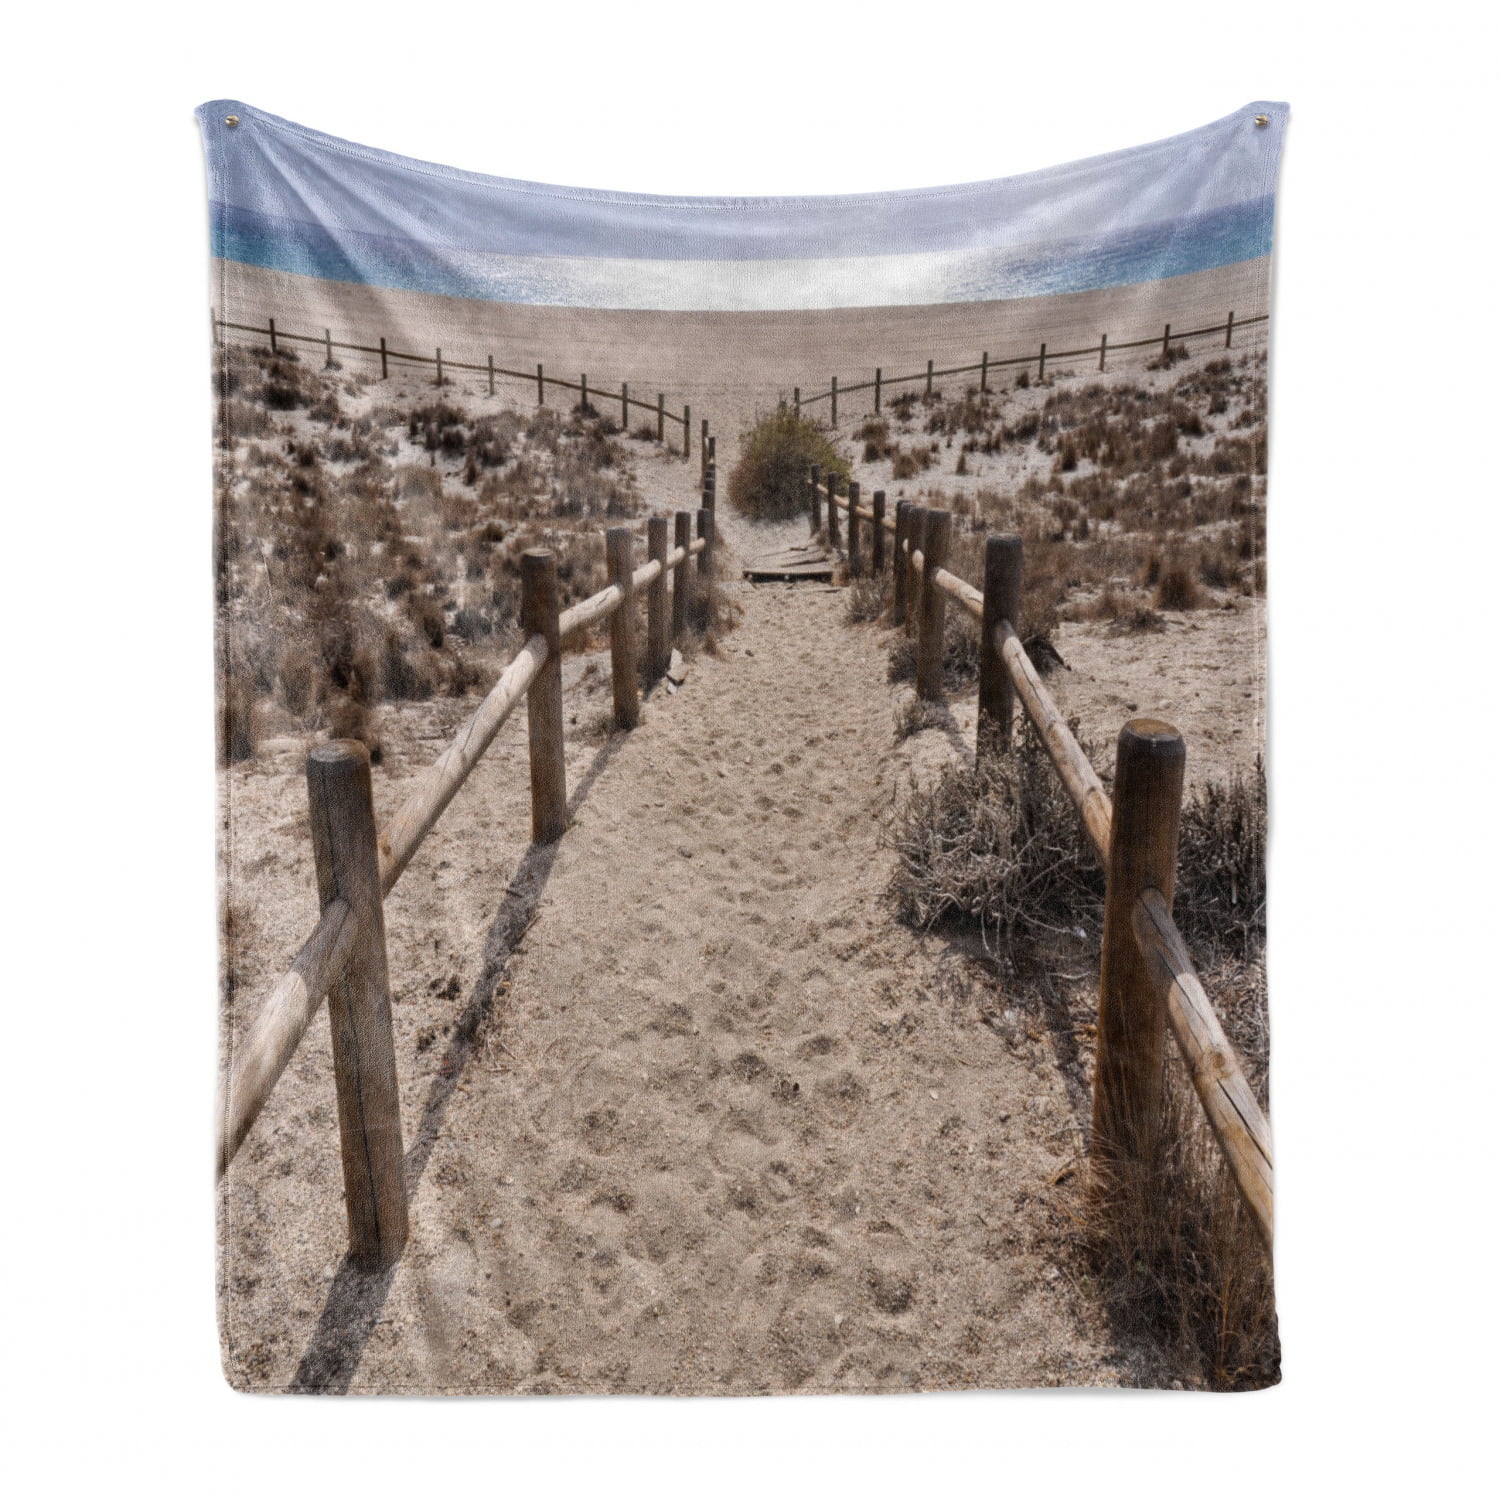 Flannel Fleece Accent Piece Soft Couch Cover for Adults Blue Beige 50 x 70 Ambesonne Beach Throw Blanket San Miguel Beach Near Gate Cape Atlantic Ocean Coast Serene Holiday Warm Relax Scene